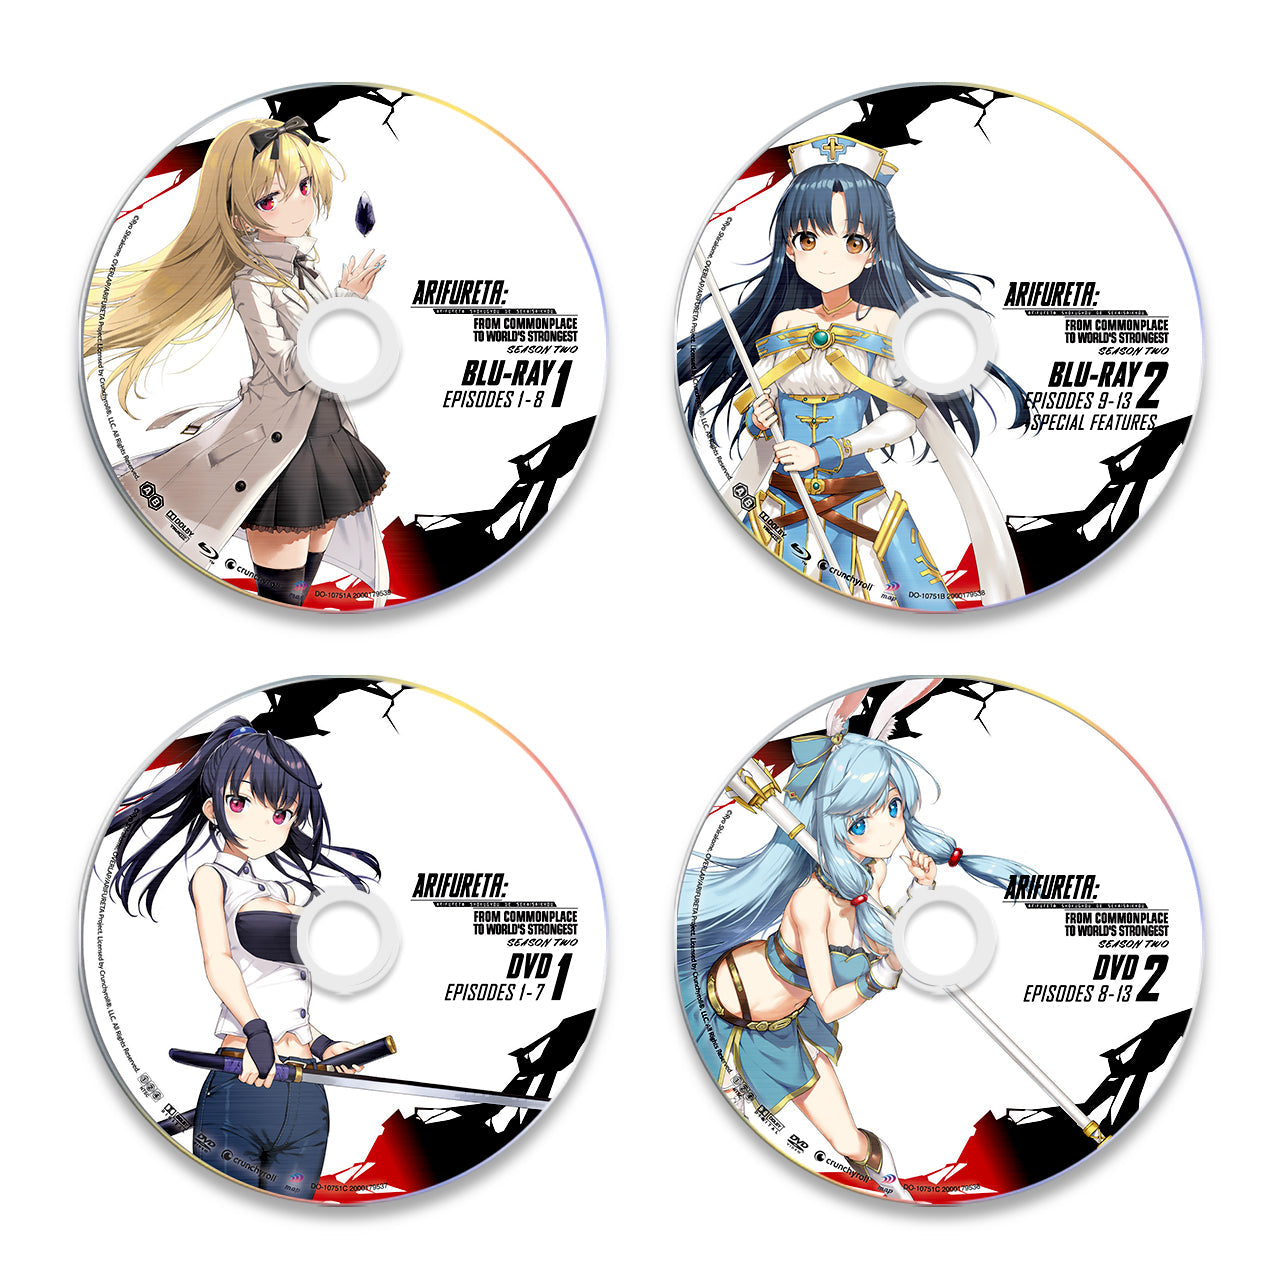 Arifureta: From Commonplace to World's Strongest - Season 2 - BD/DVD - LE image count 9